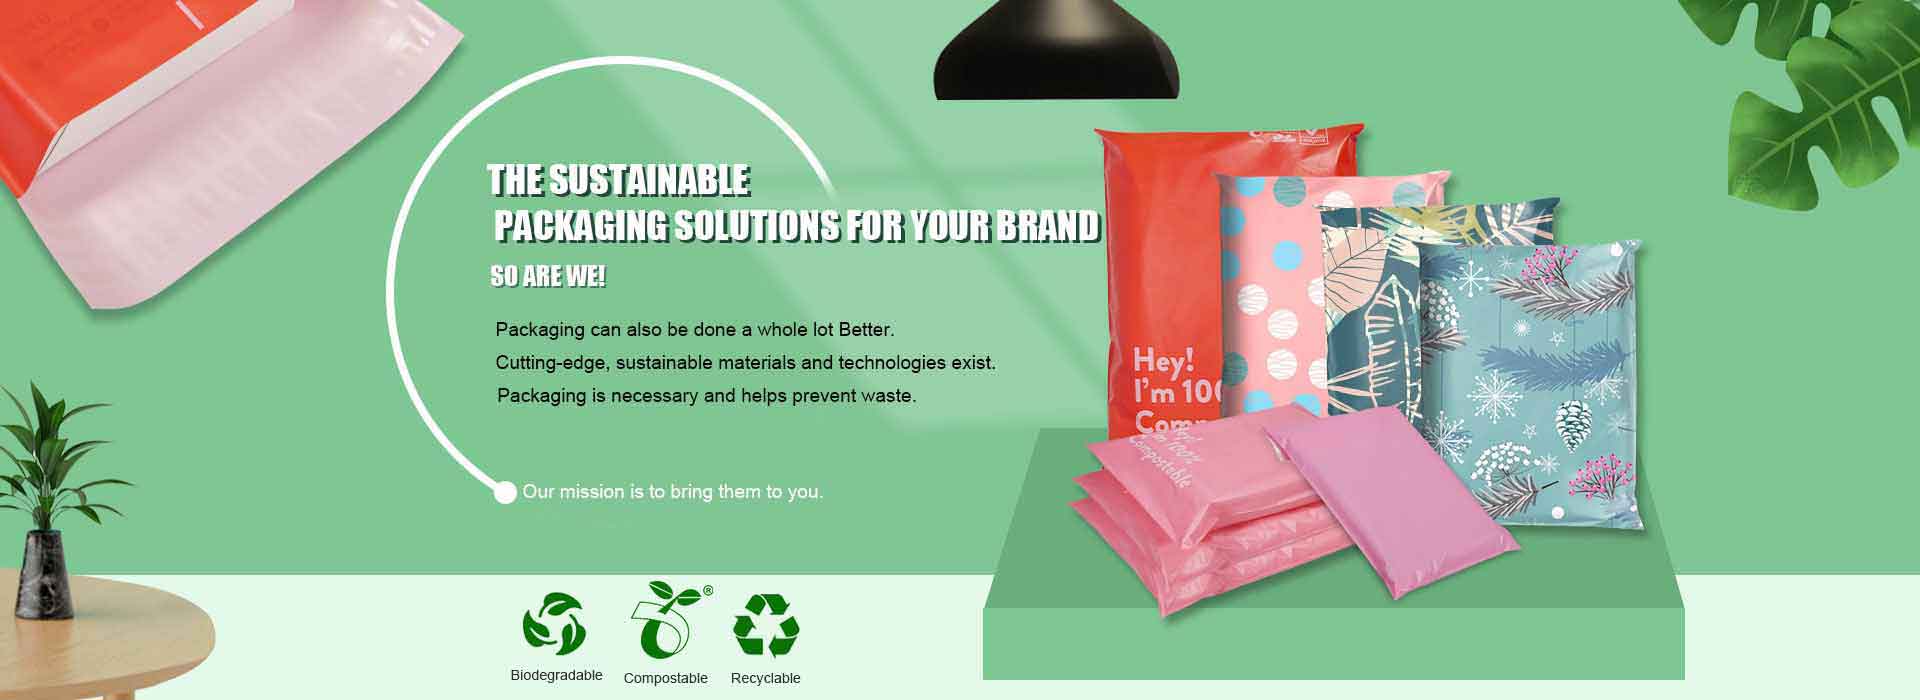 Poly Mailer Self Sealing|Shipping Envelopes Courier Mailer Mailing Bags